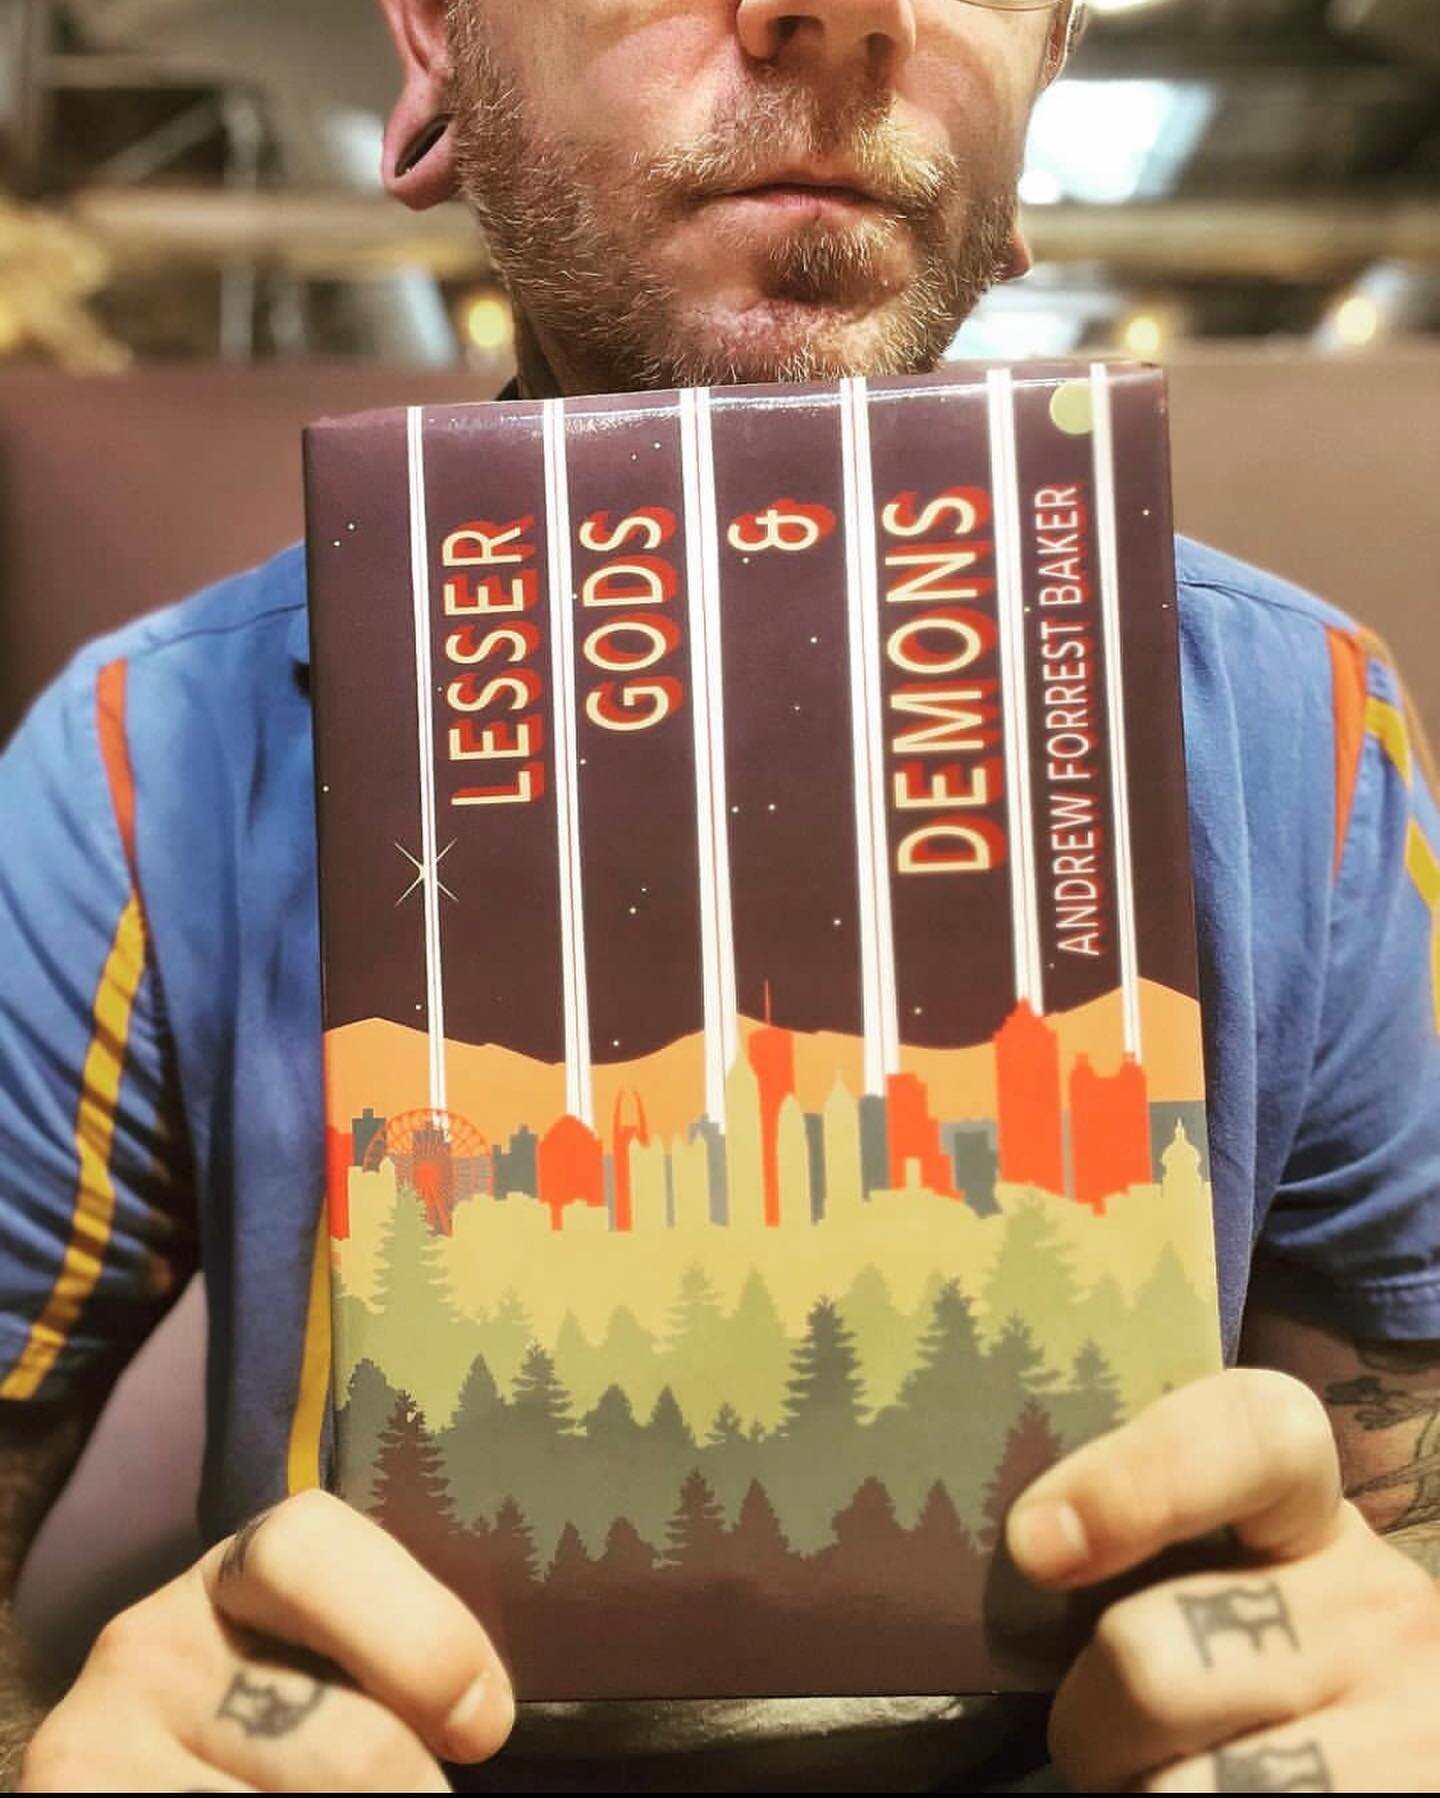 Andrew&rsquo;s new book LESSER GODS AND DEMONS is now available through @parlyaree press in hardback and digital form! #ATLWRITERS #atlanta #doityourself #parlyareepress